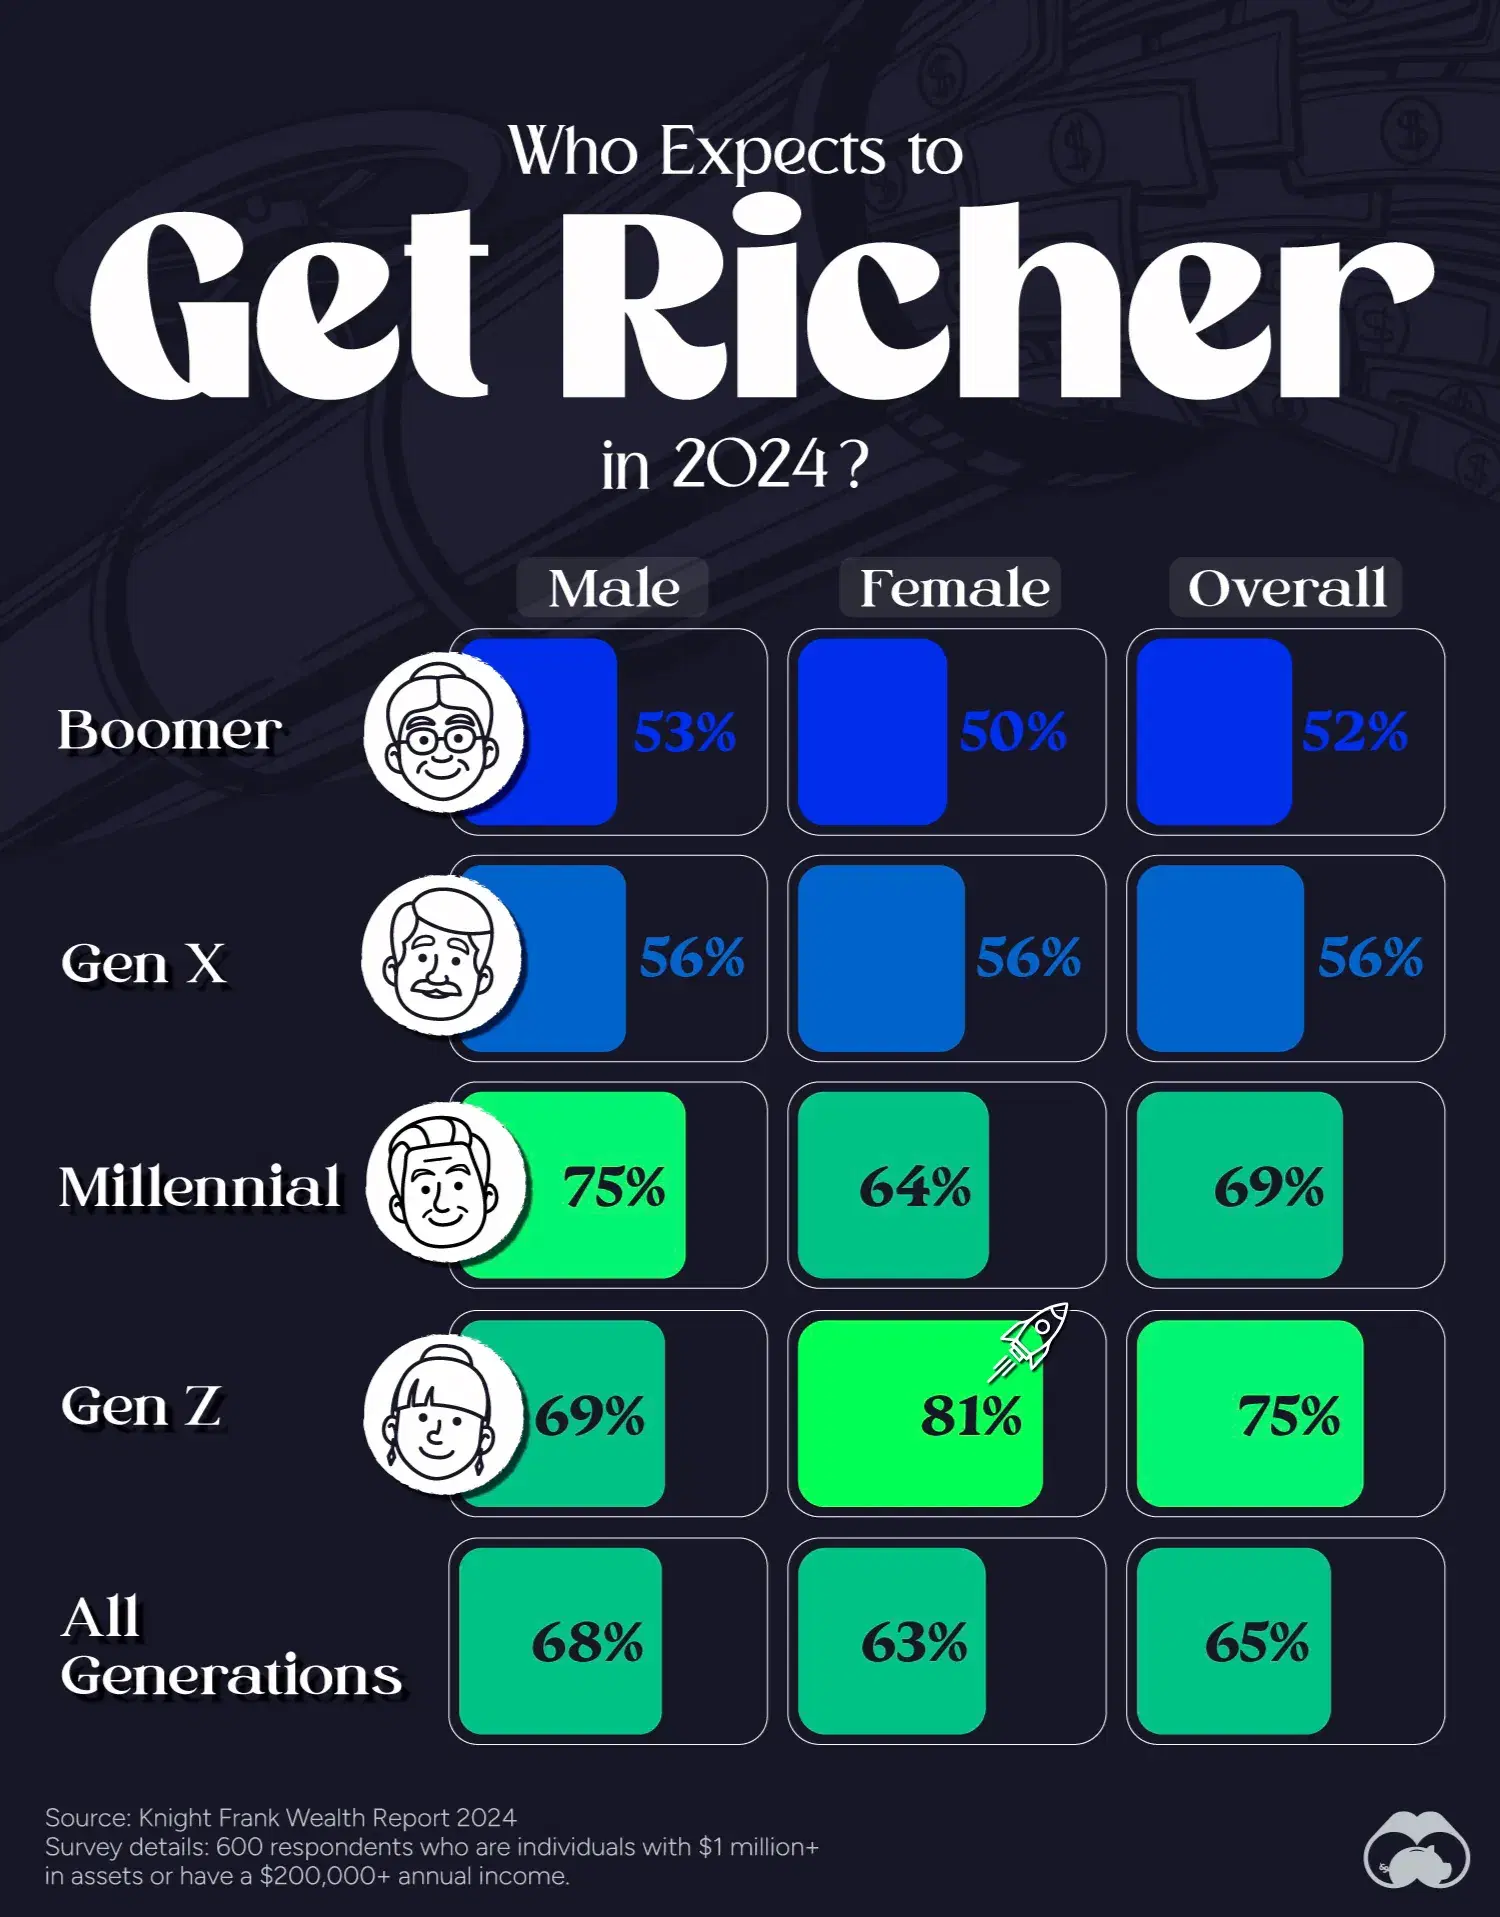 Gen Z Women Are Most Optimistic About Increasing Their Wealth in 2024